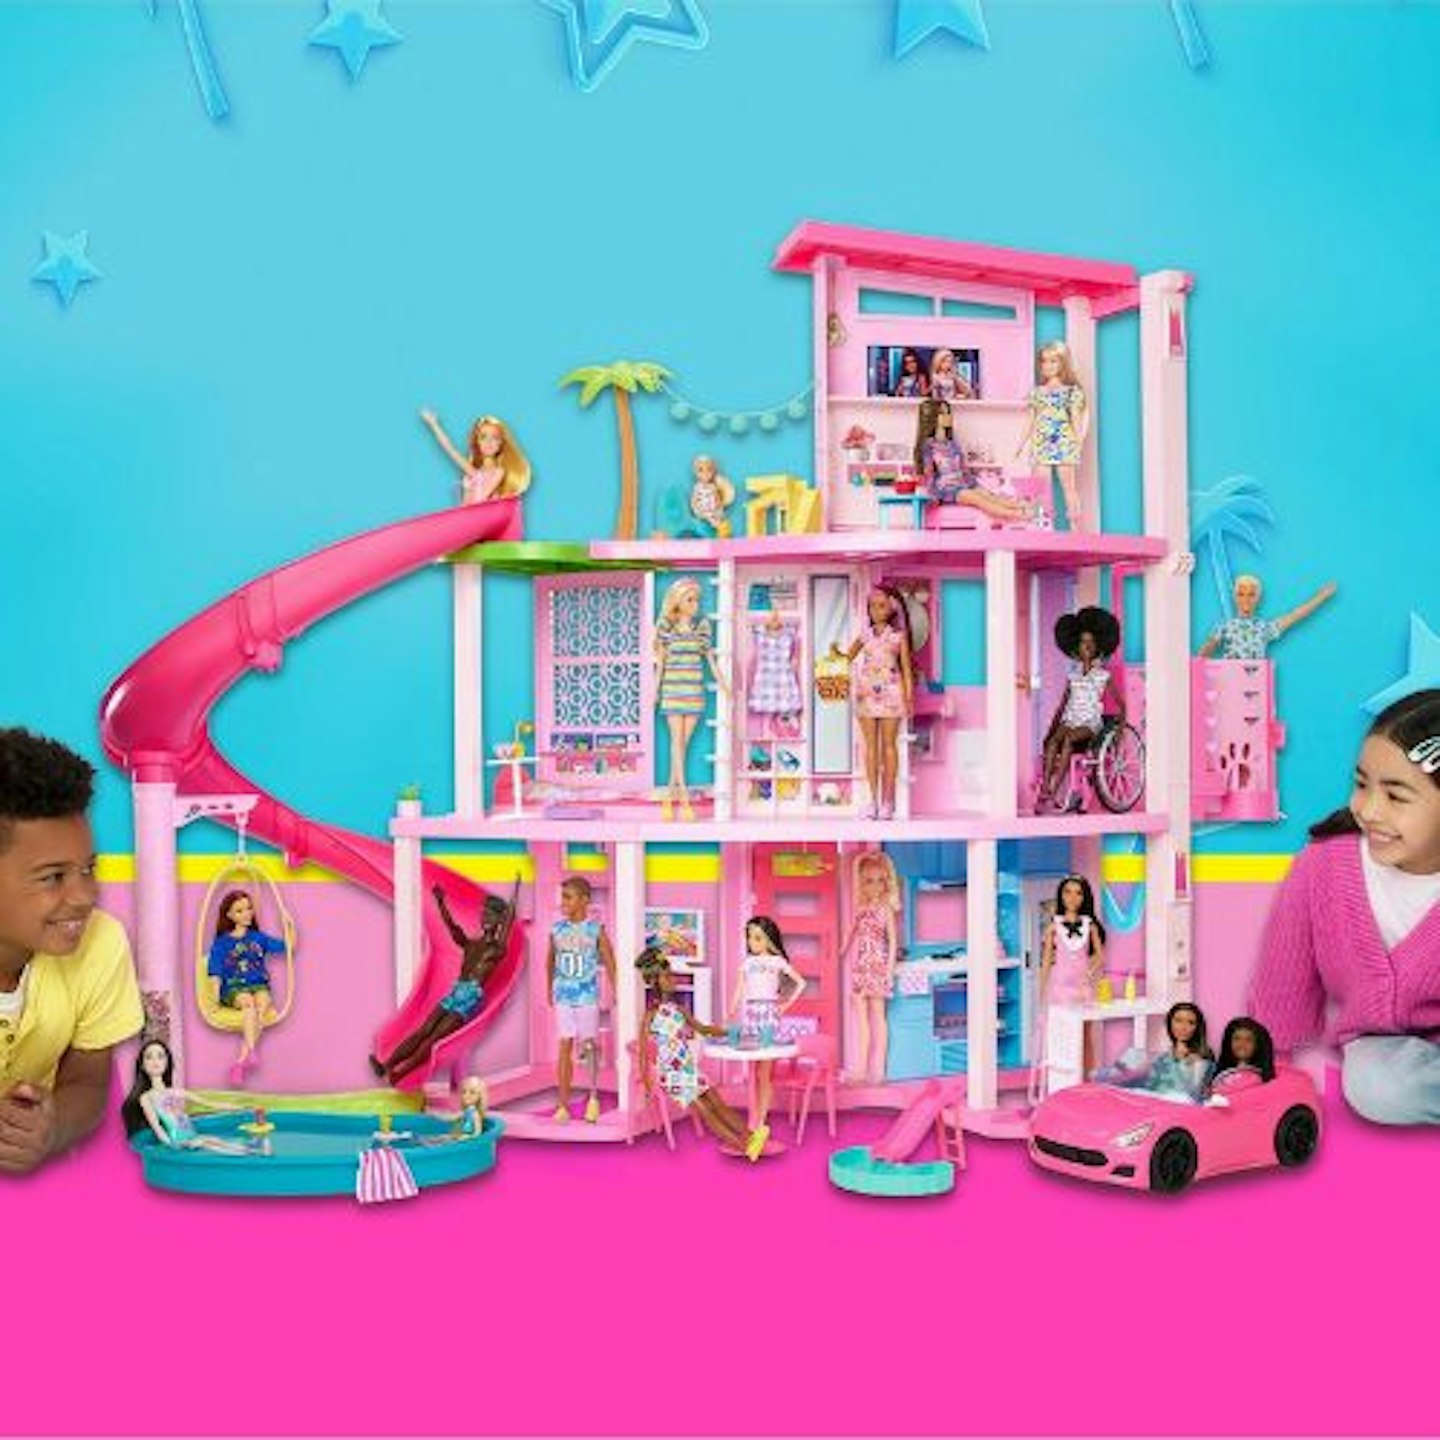 Best toys for 5 year olds Barbie DreamHouse Doll Playset, Slide and Accessories